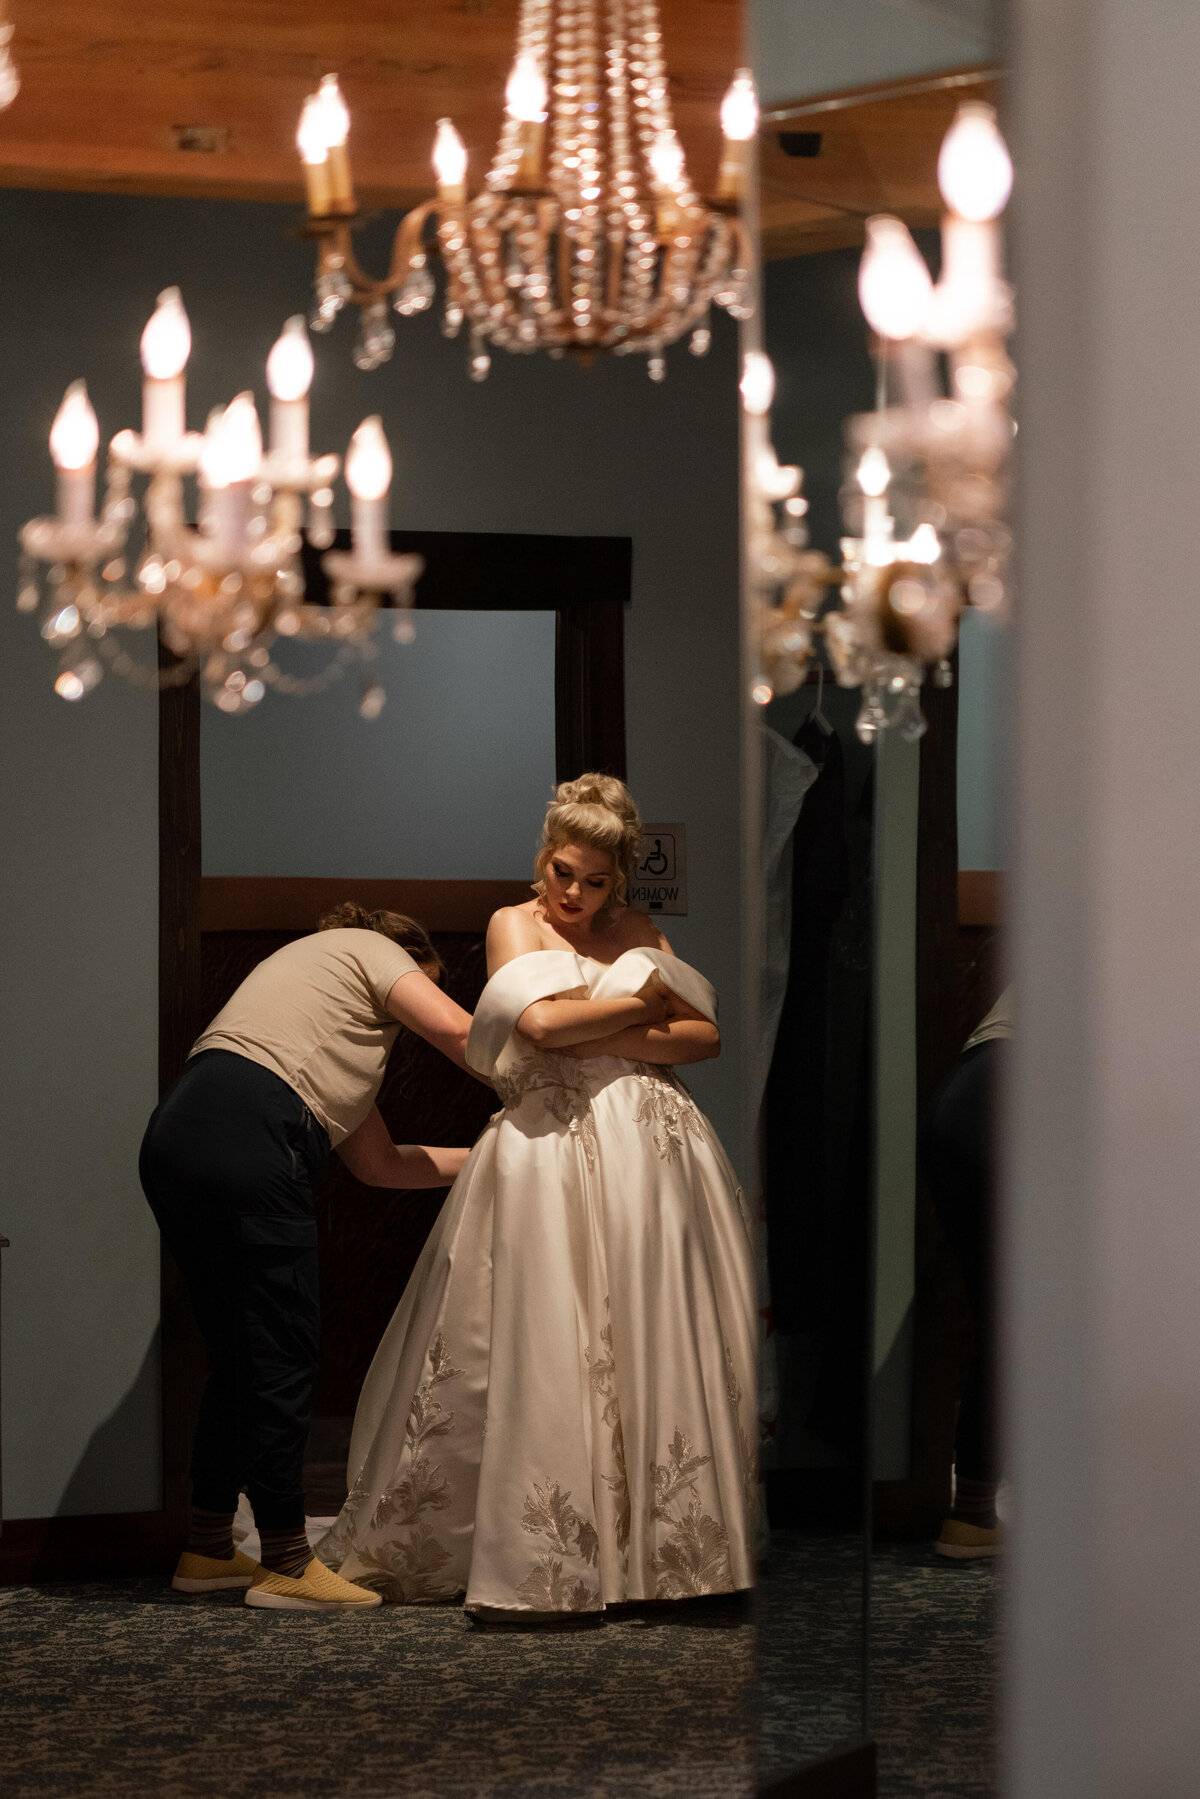 Bridesmaid helps bride button up her dress.